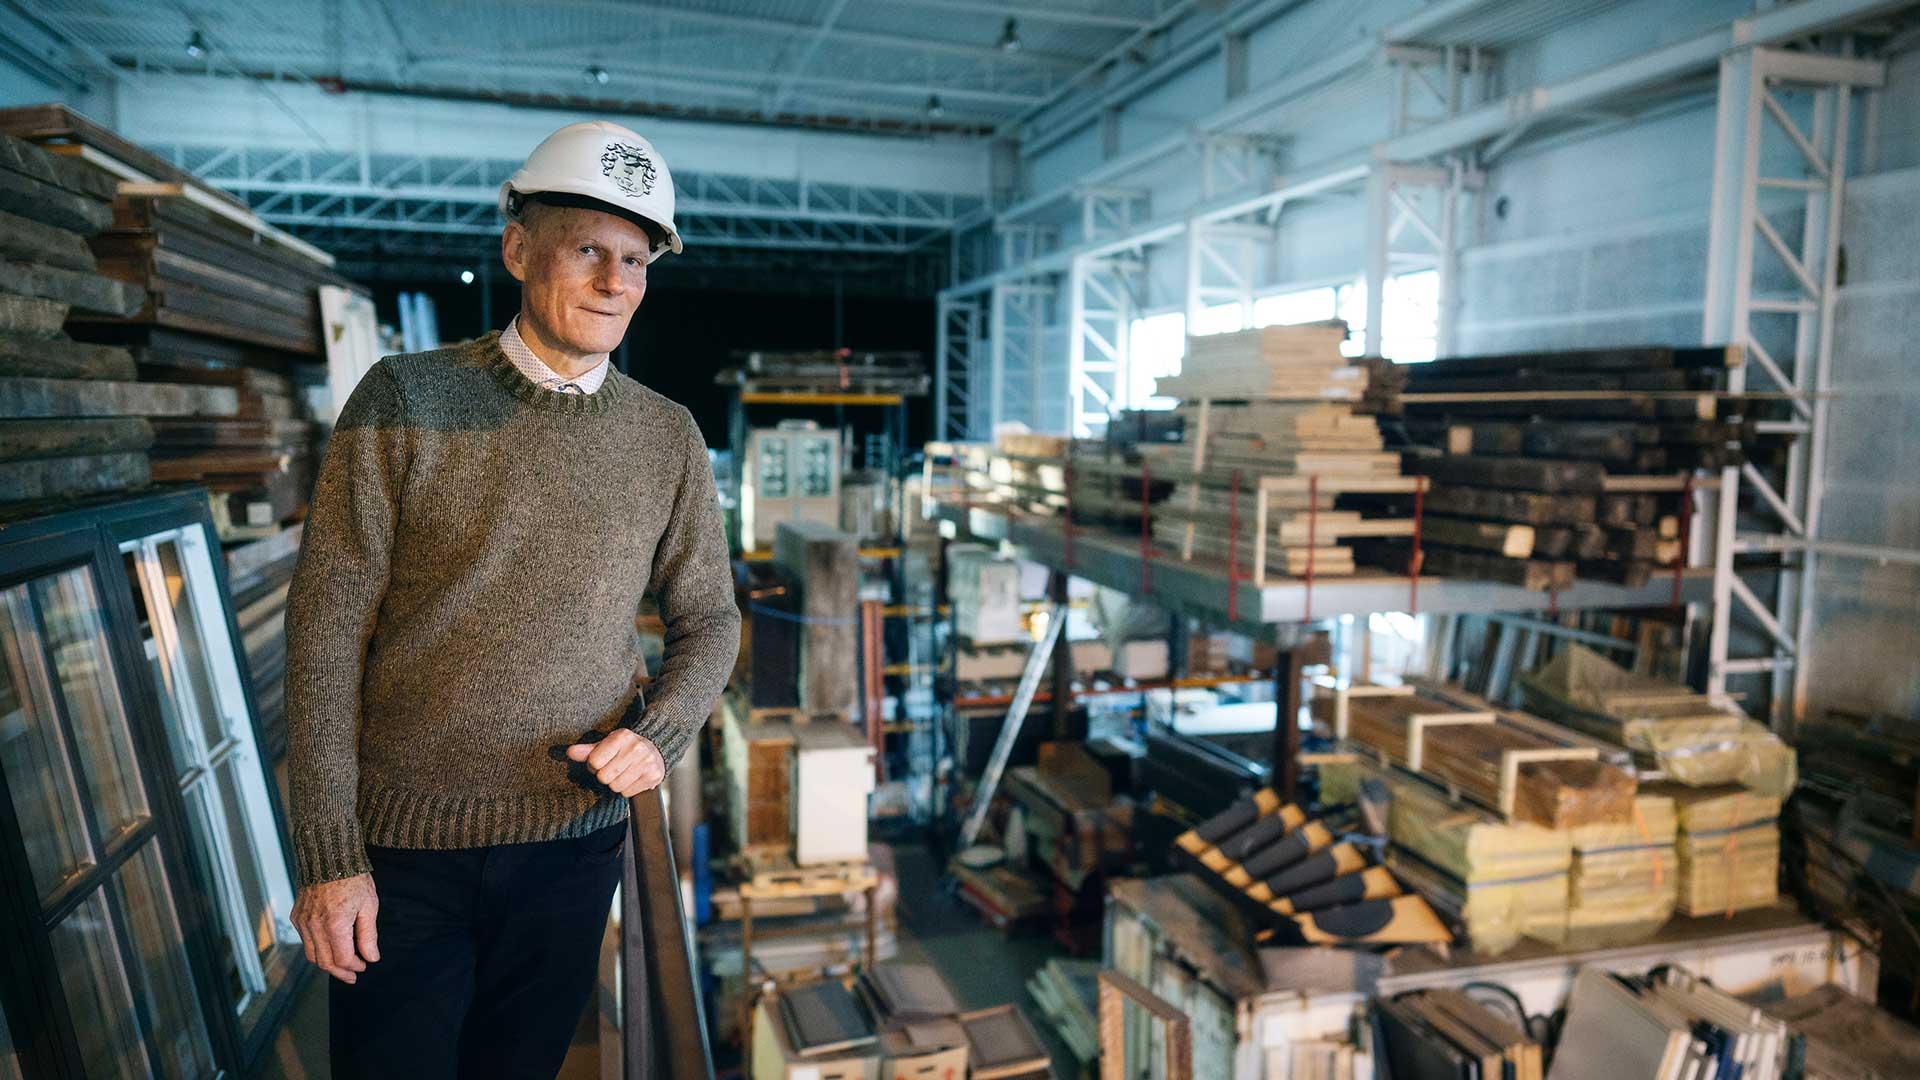 The Aarhus-based property developer Olav de Linde stands in his warehouse filled with building materials that need to be recycled.